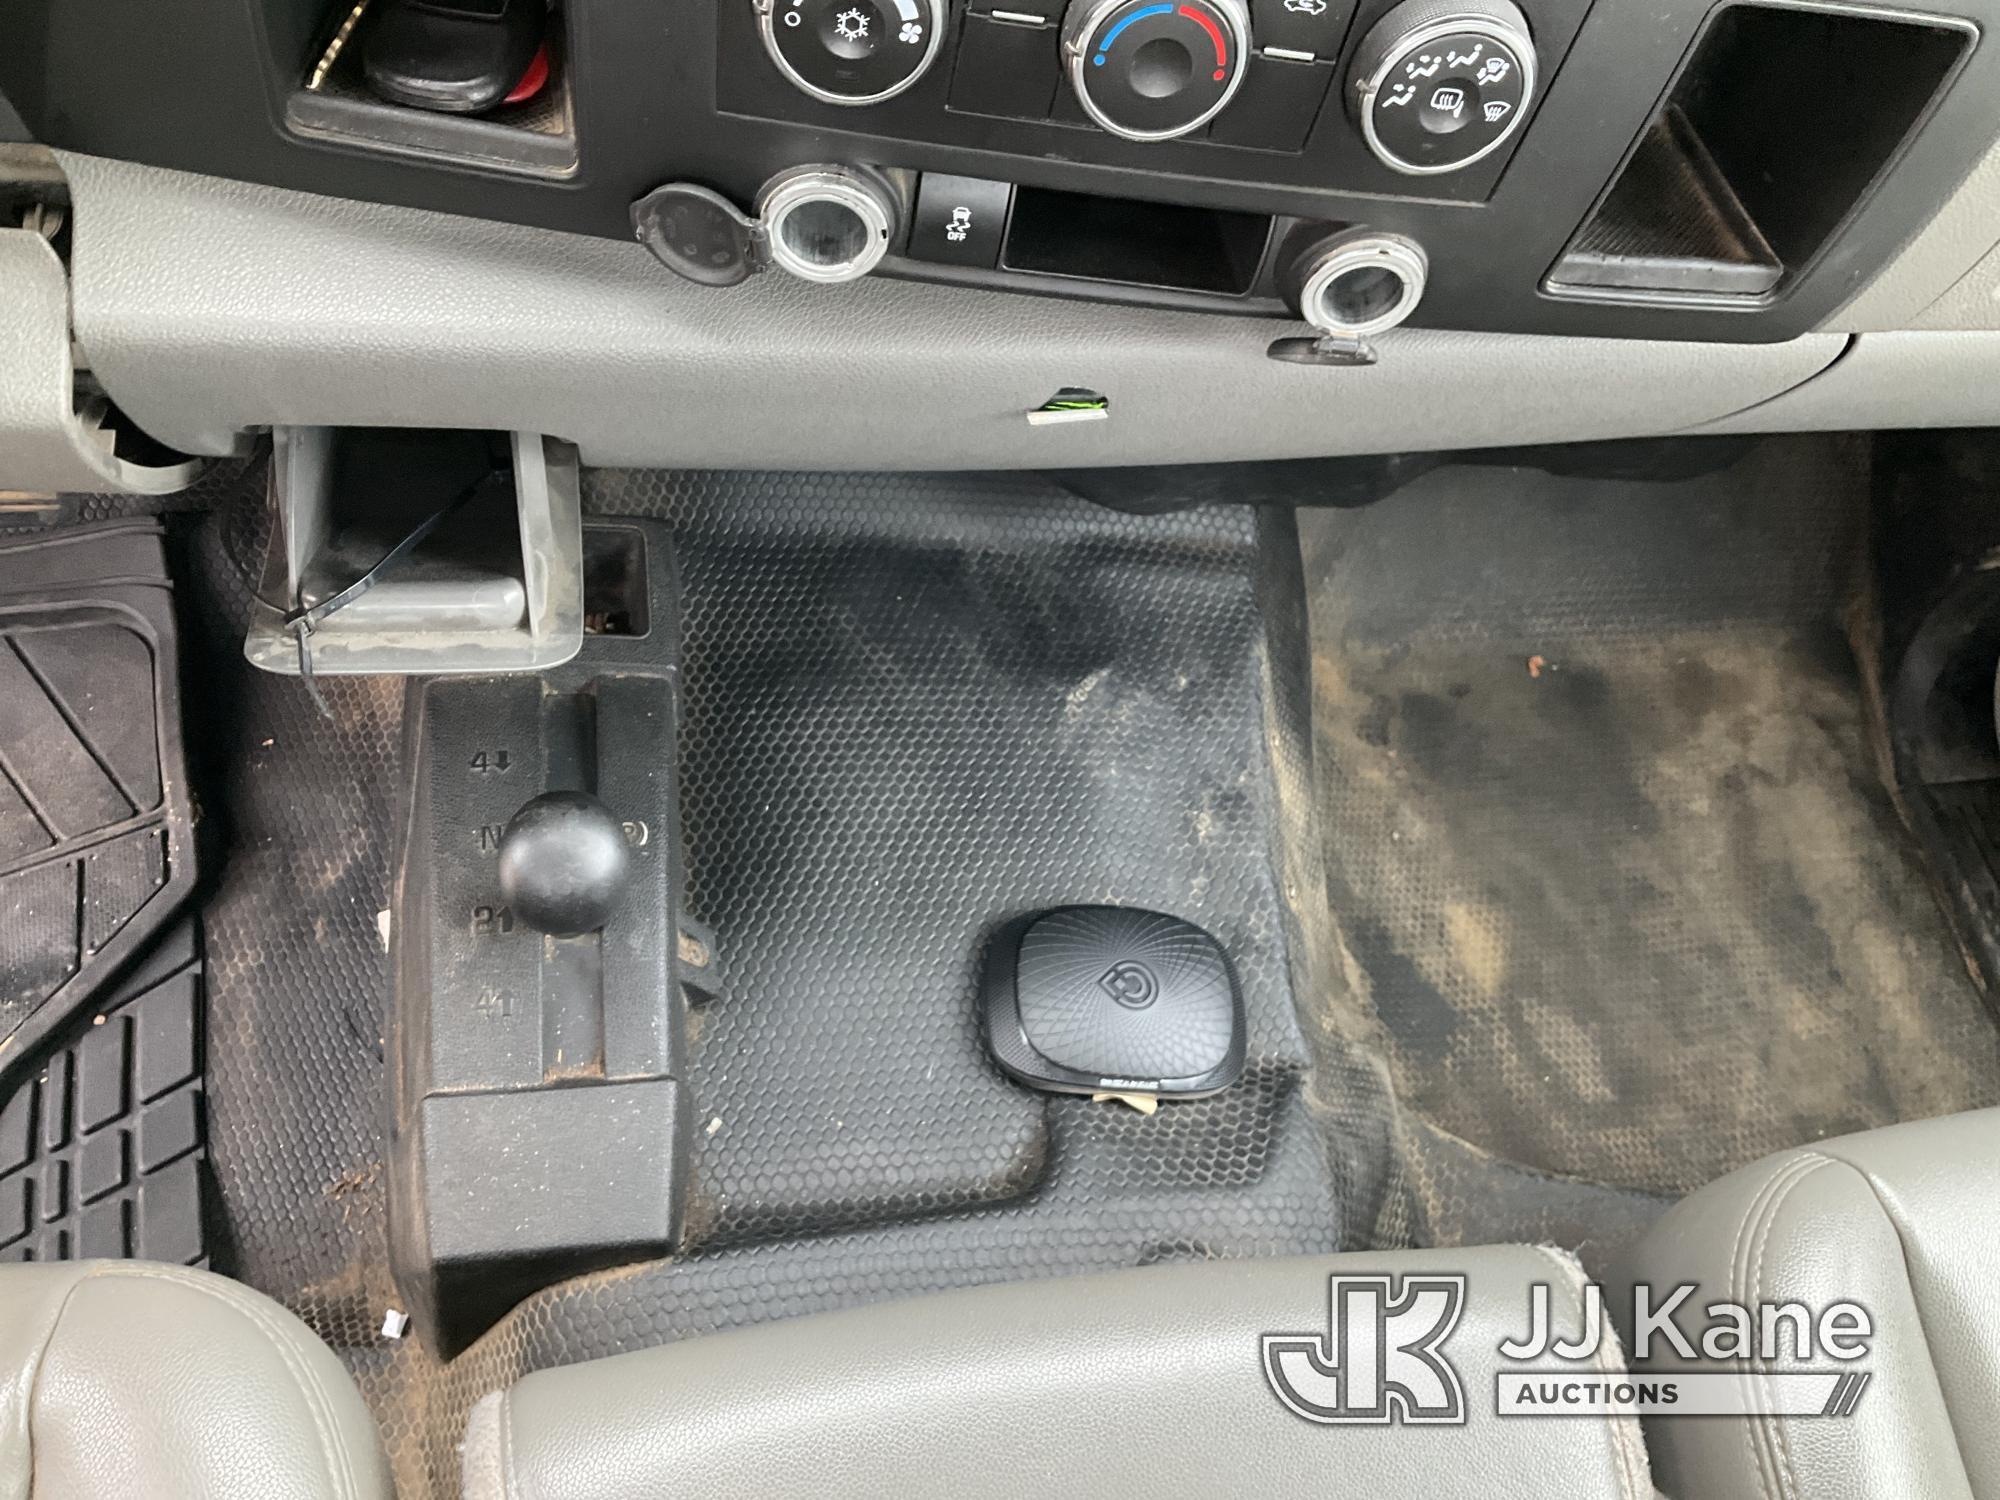 (Conway, AR) 2014 Chevrolet Silverado 2500HD 4x4 Crew-Cab Pickup Truck Not Running, Condition Unknow